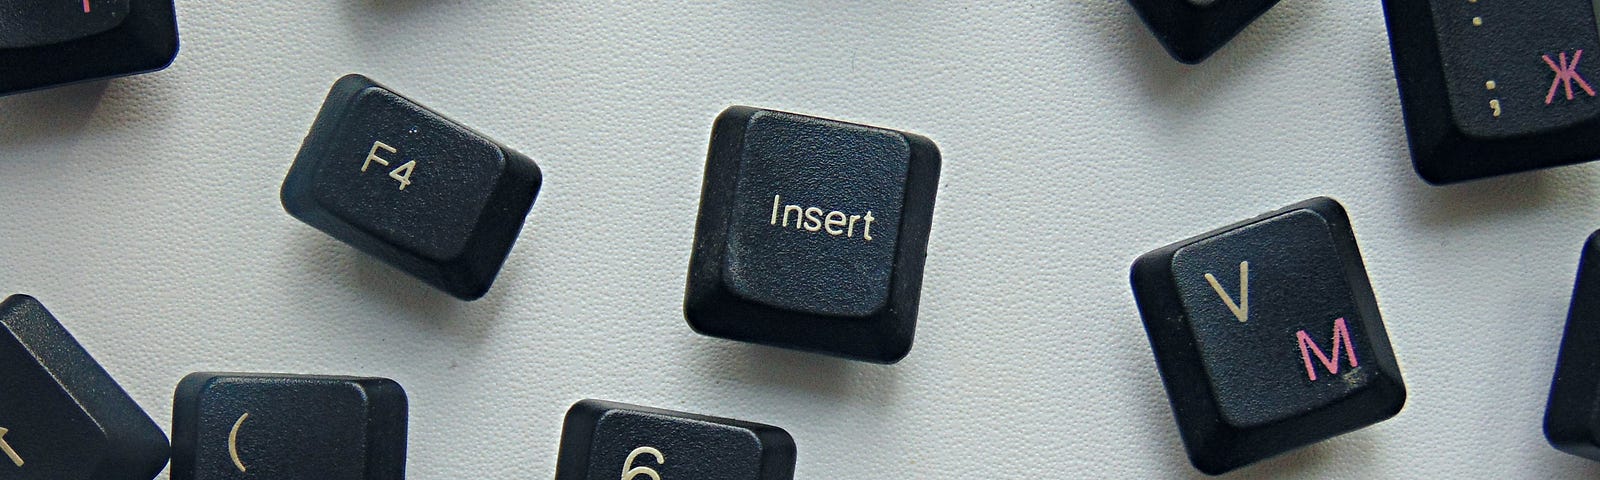 A bunch of keyboard buttons on a flat off-white surface at different angles and spaces.